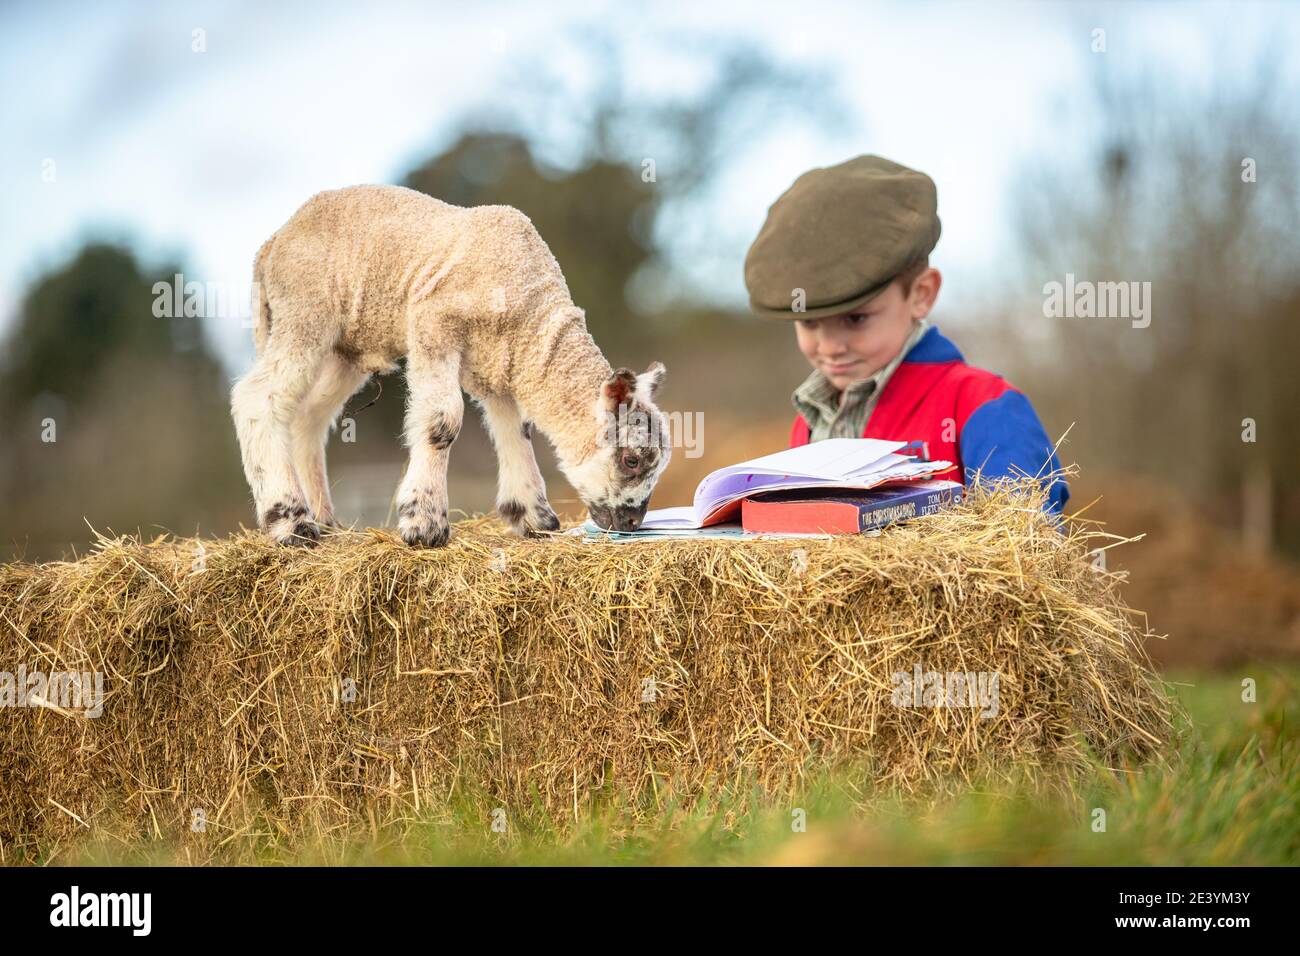 Arley, Worcestershire, UK. 21st Jan, 2021. 4-year-old Reggie Mills does his reception year homeschooling with a day-old lamb on his family's farmyard in Arley, near Kidderminster, Worcestershire. Schools in the UK remain closed to the majority of pupils due to the coronavirus, and some parents have to juggle their children's guided learning with continuing to work. Credit: Peter Lopeman/Alamy Live News Stock Photo